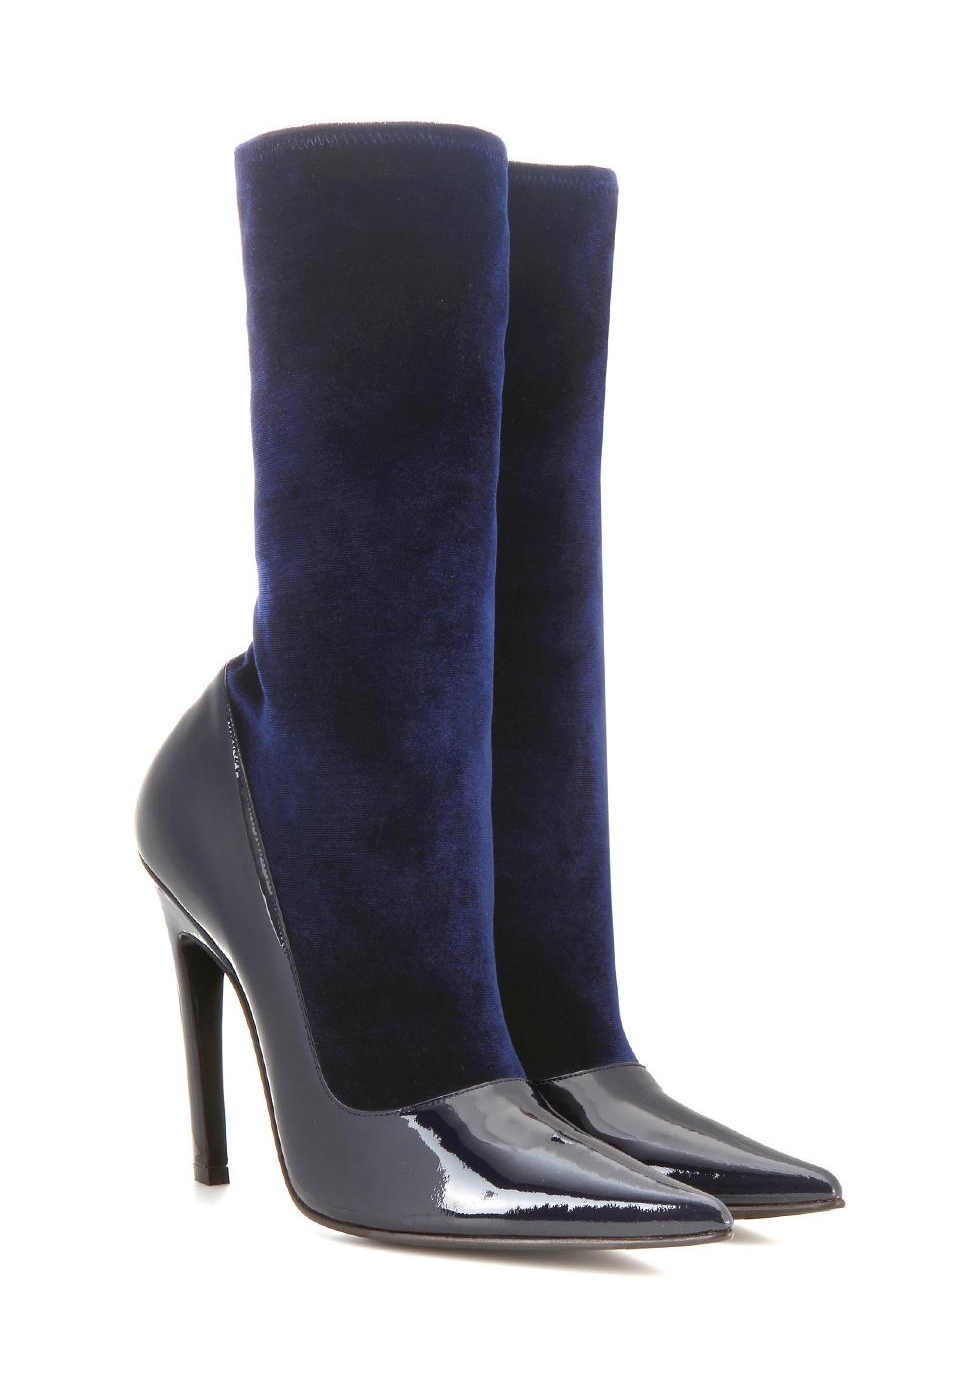 Balenciaga midcalf booties in blue Patent Leather - Italian Boutique